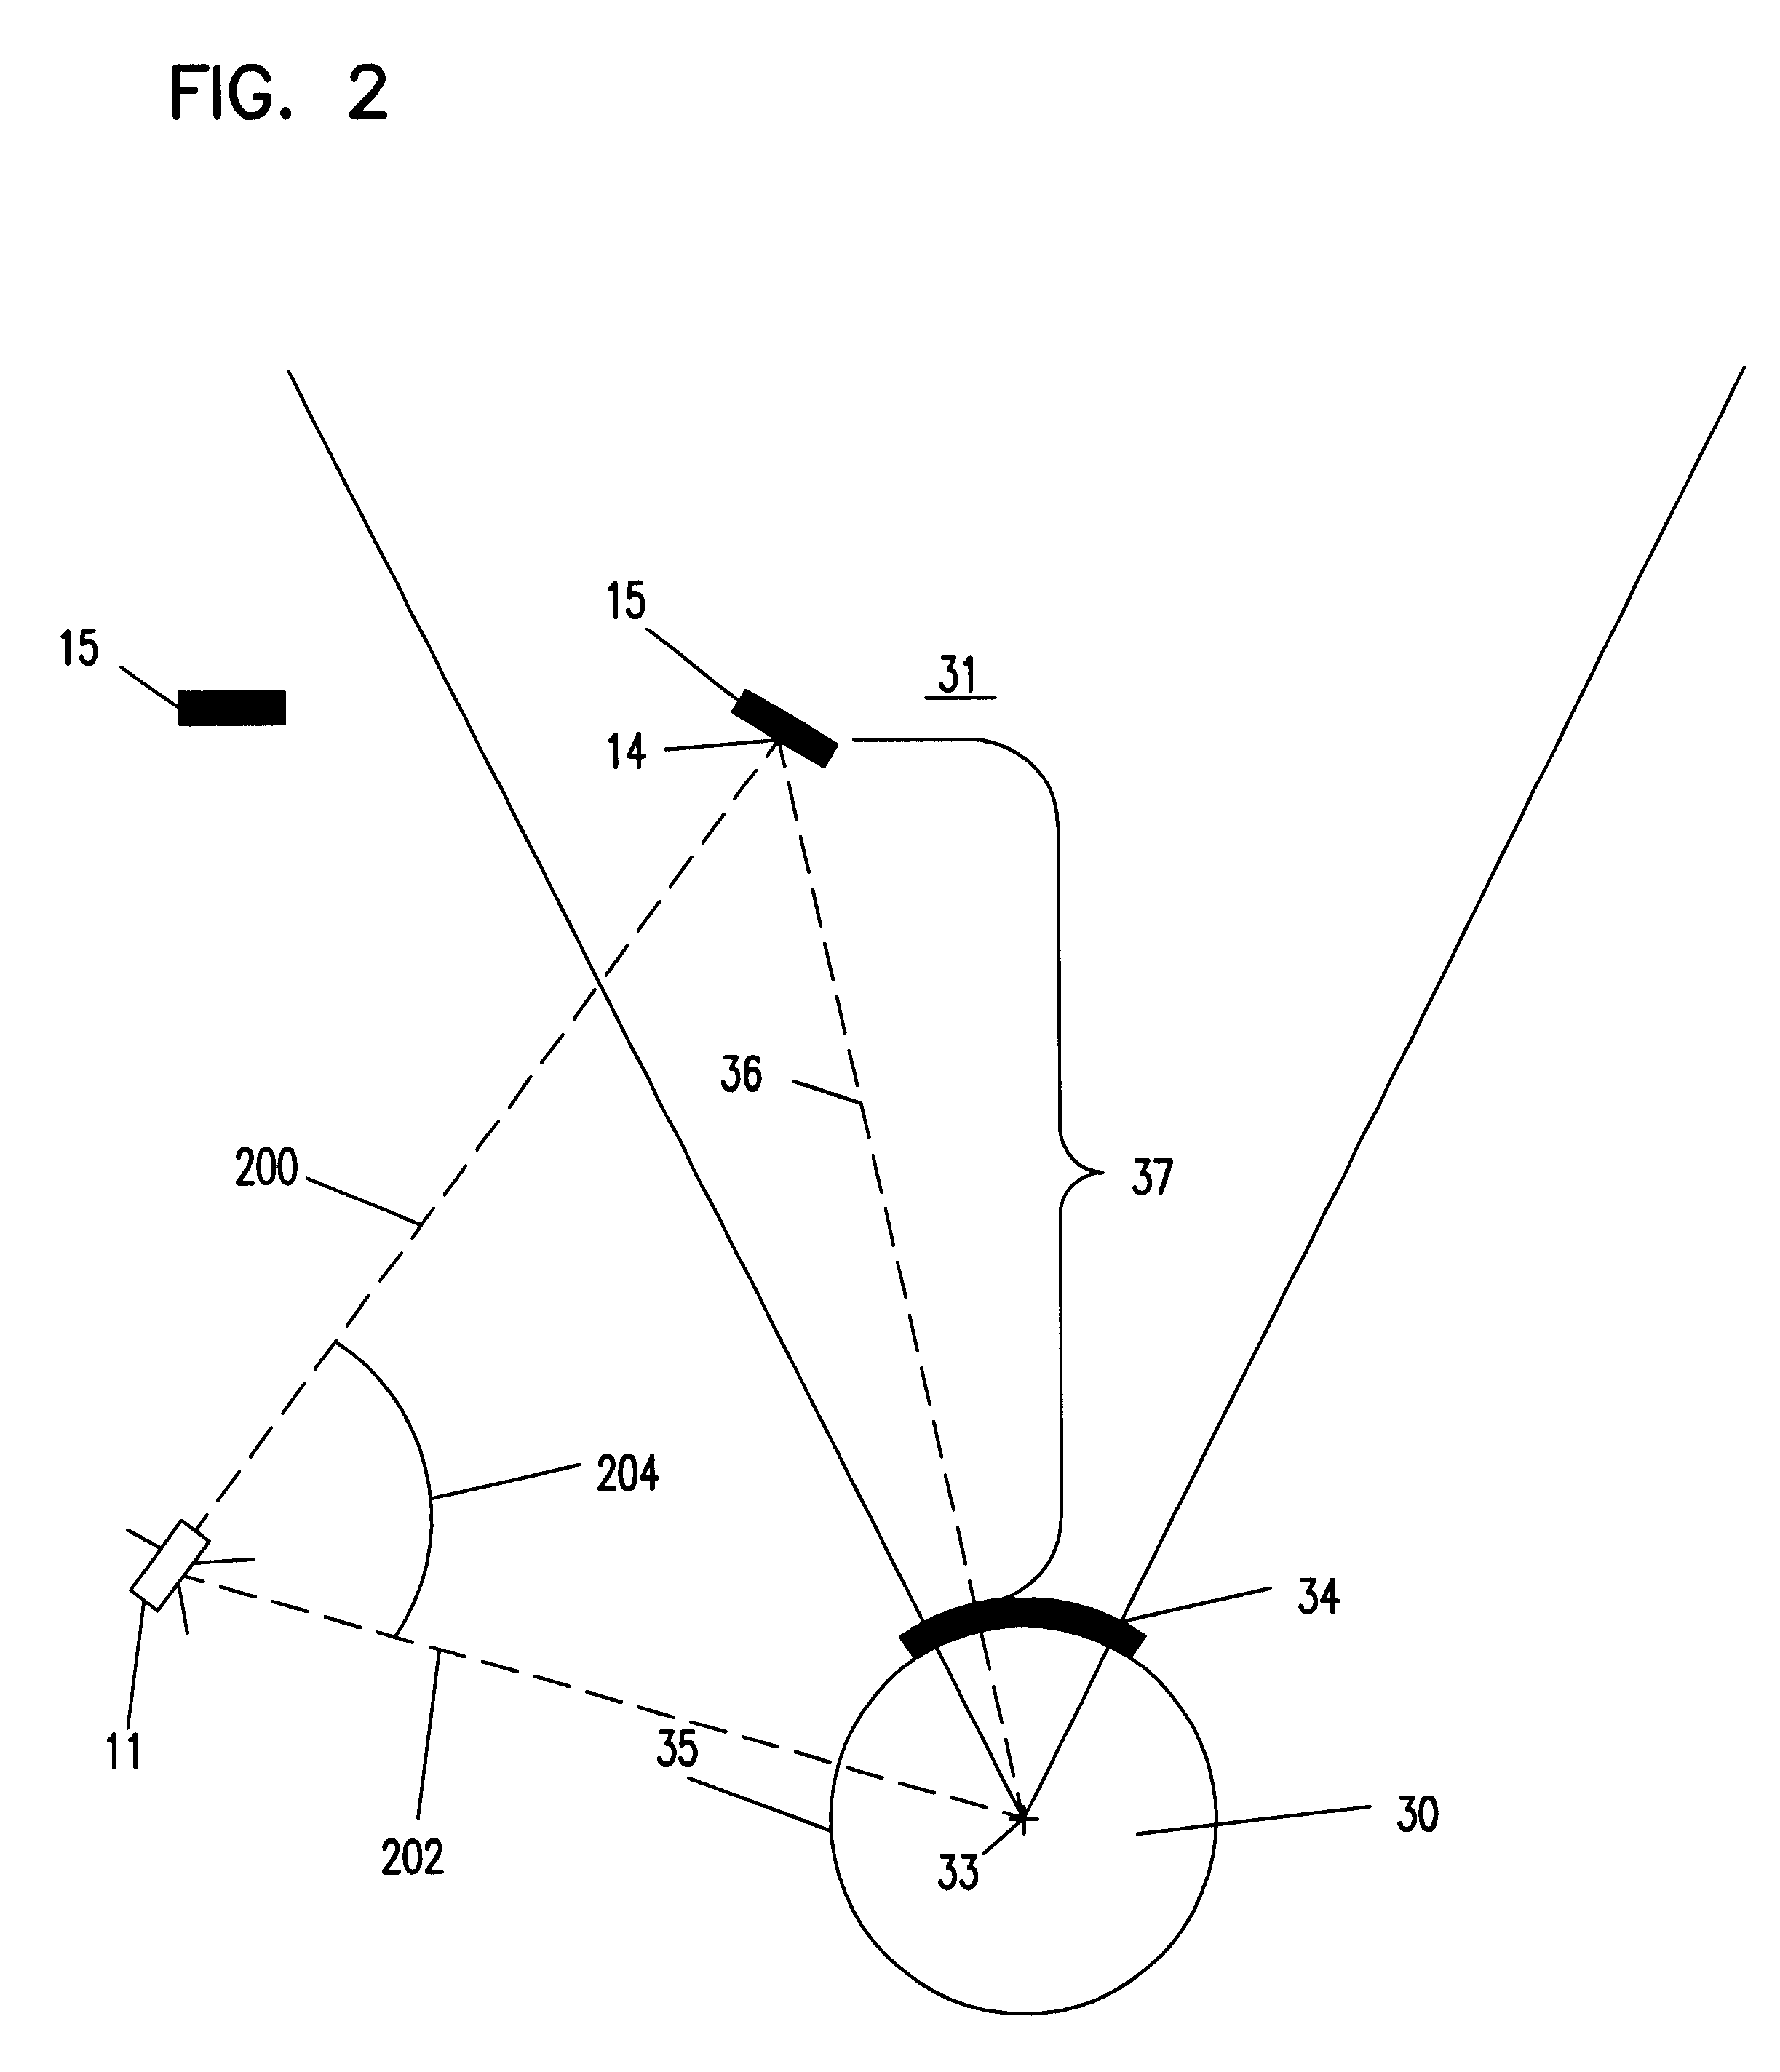 Track and field measuring apparatus and method